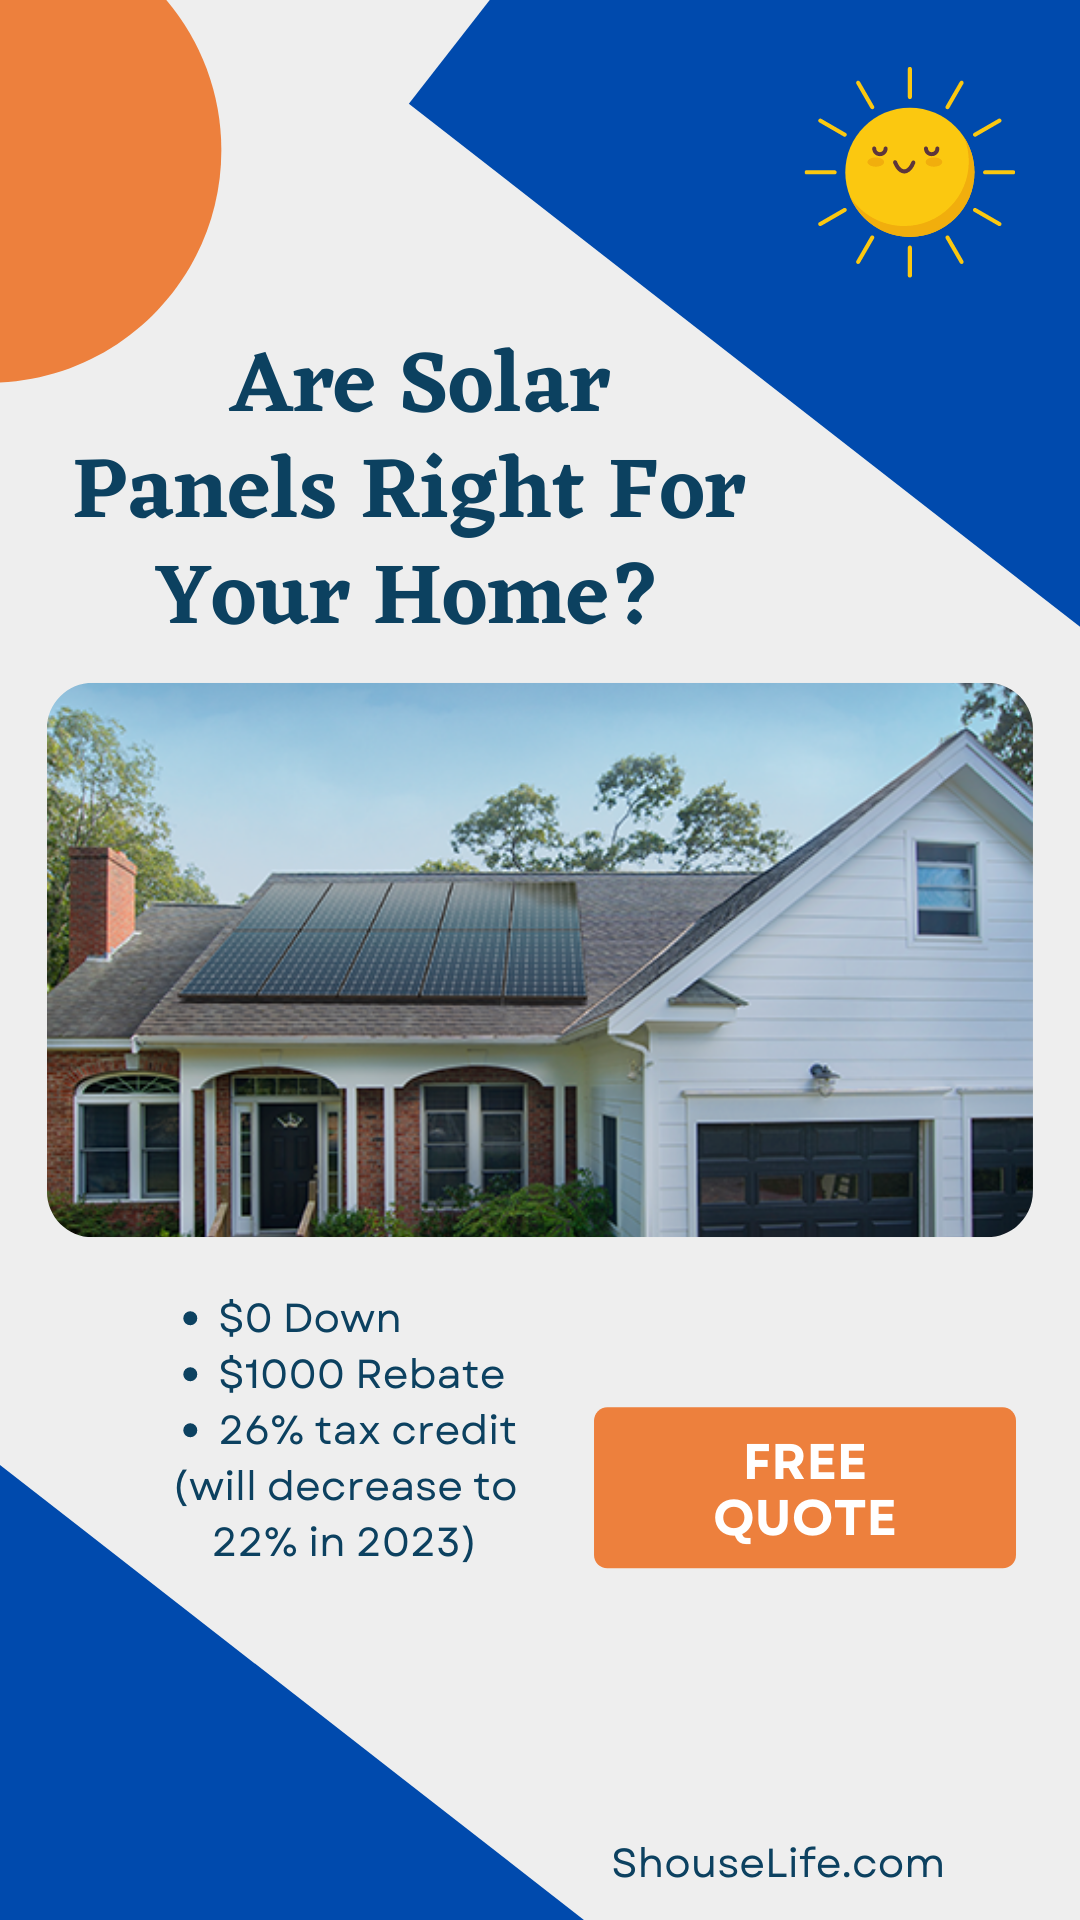 Are Solar Panels Right For Your Home